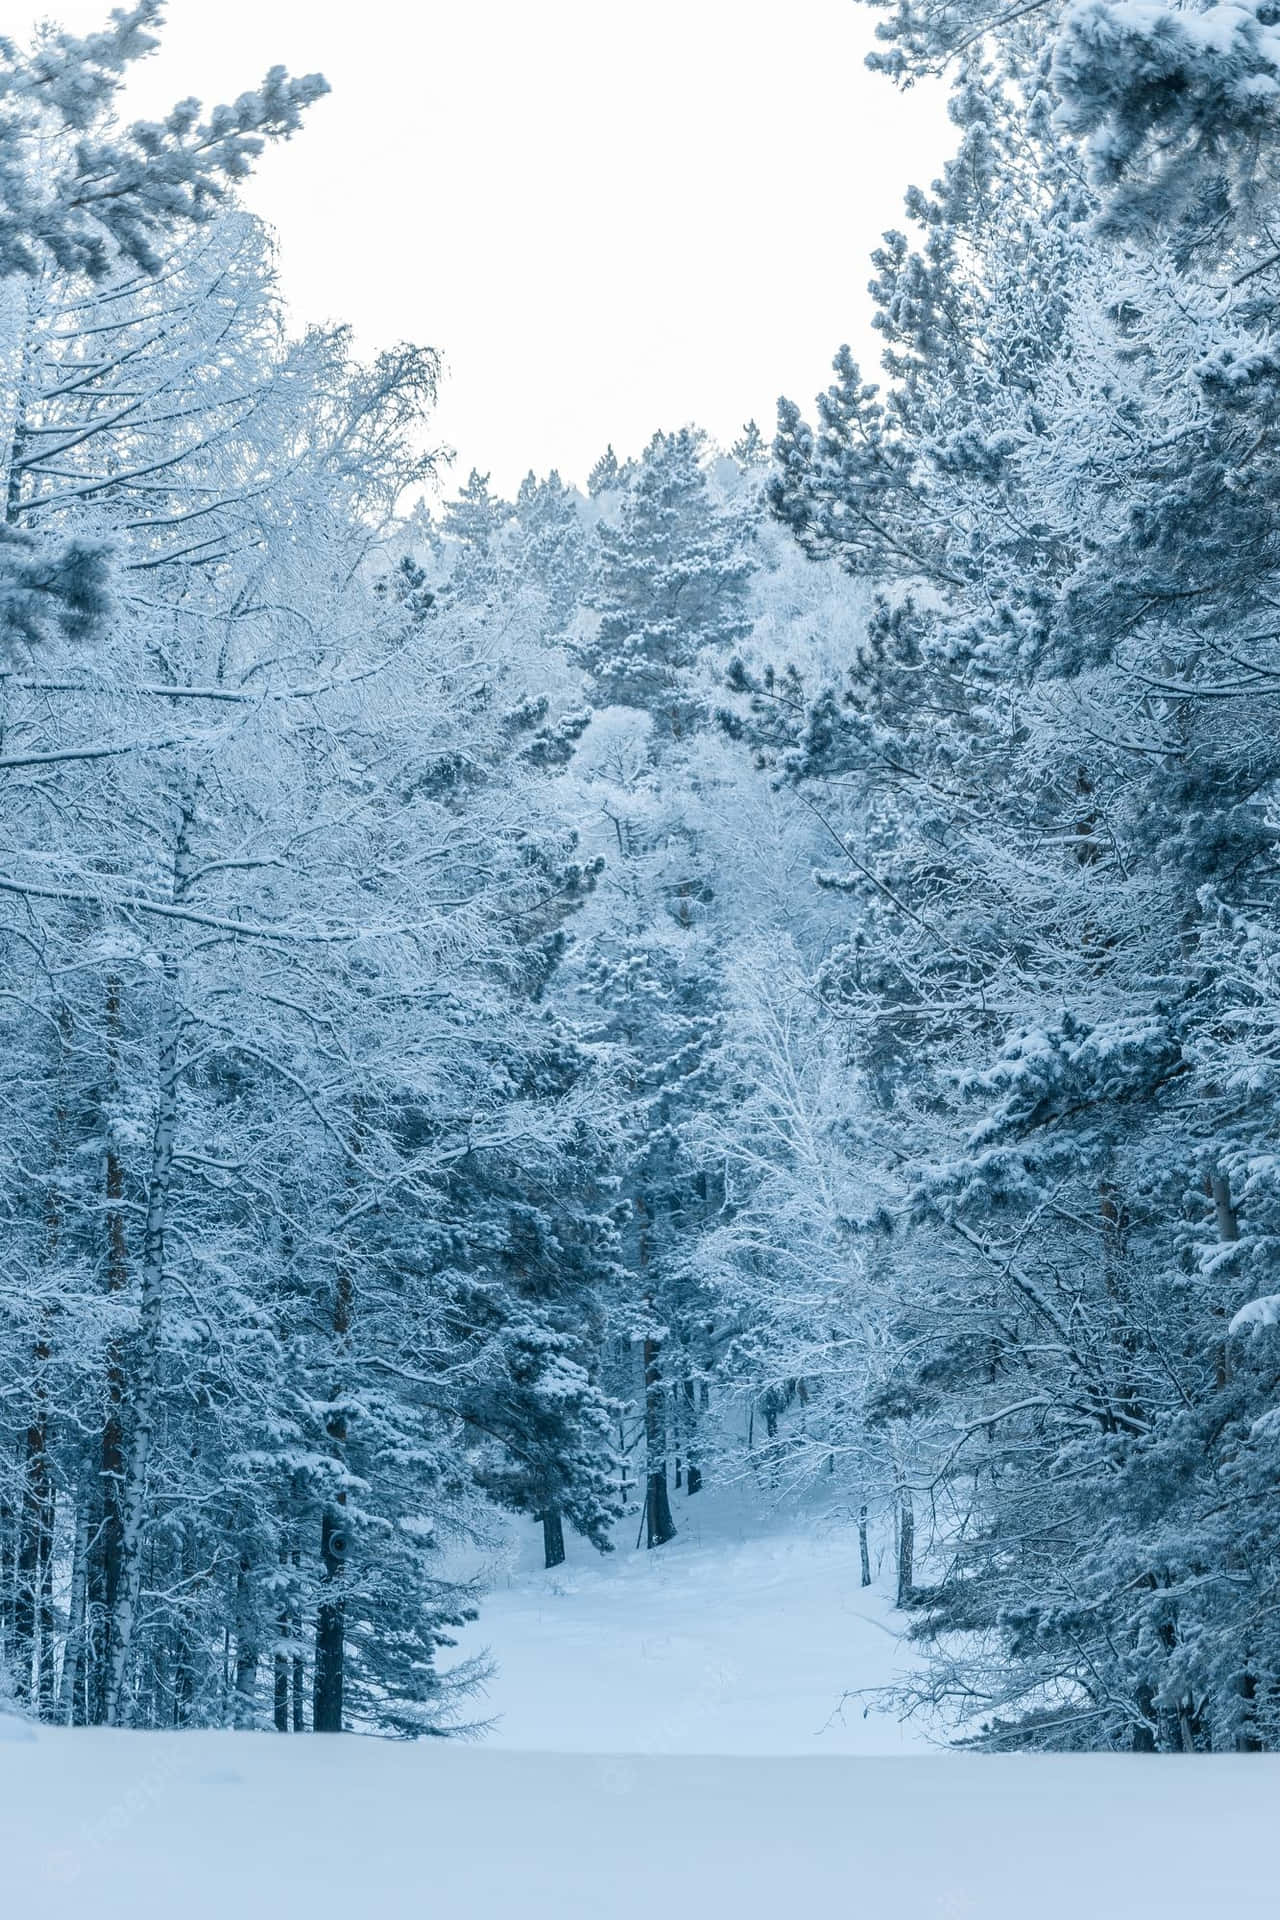 A Stunning Winter View Of A Snowy Forest